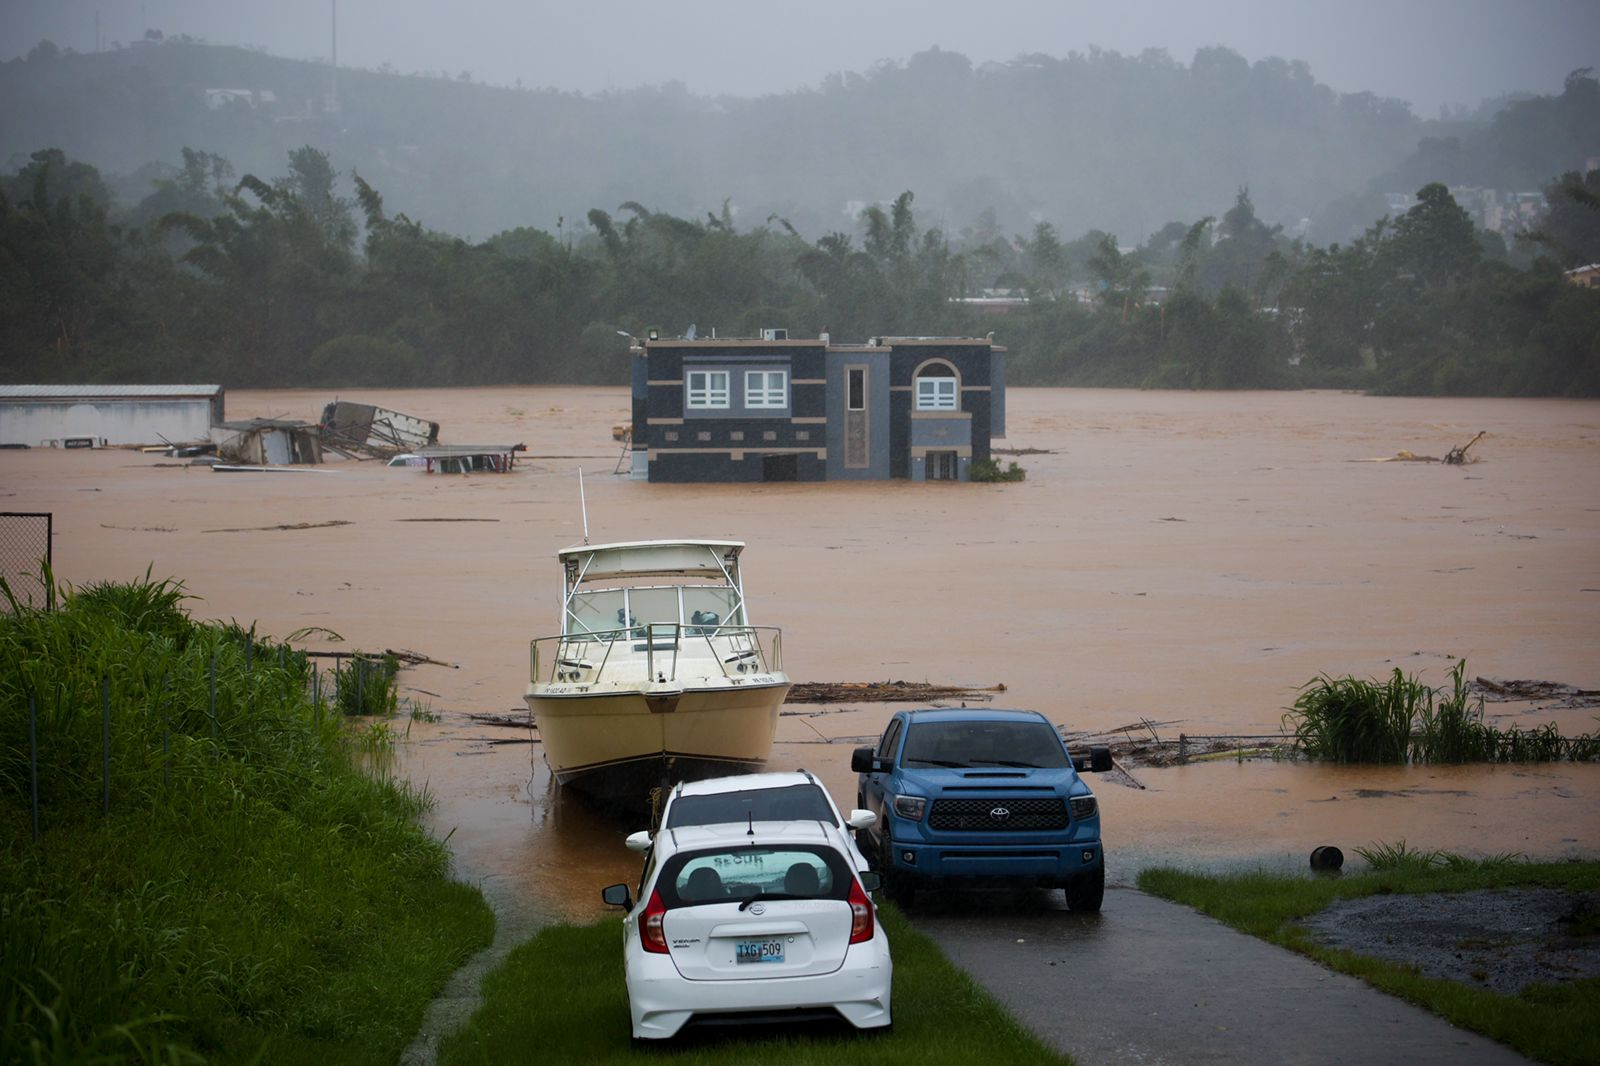 PHOTO: People inside a house await rescue from the floods caused by Hurricane Fiona in Cayey, Puerto Rico, on Sept. 18, 2022.